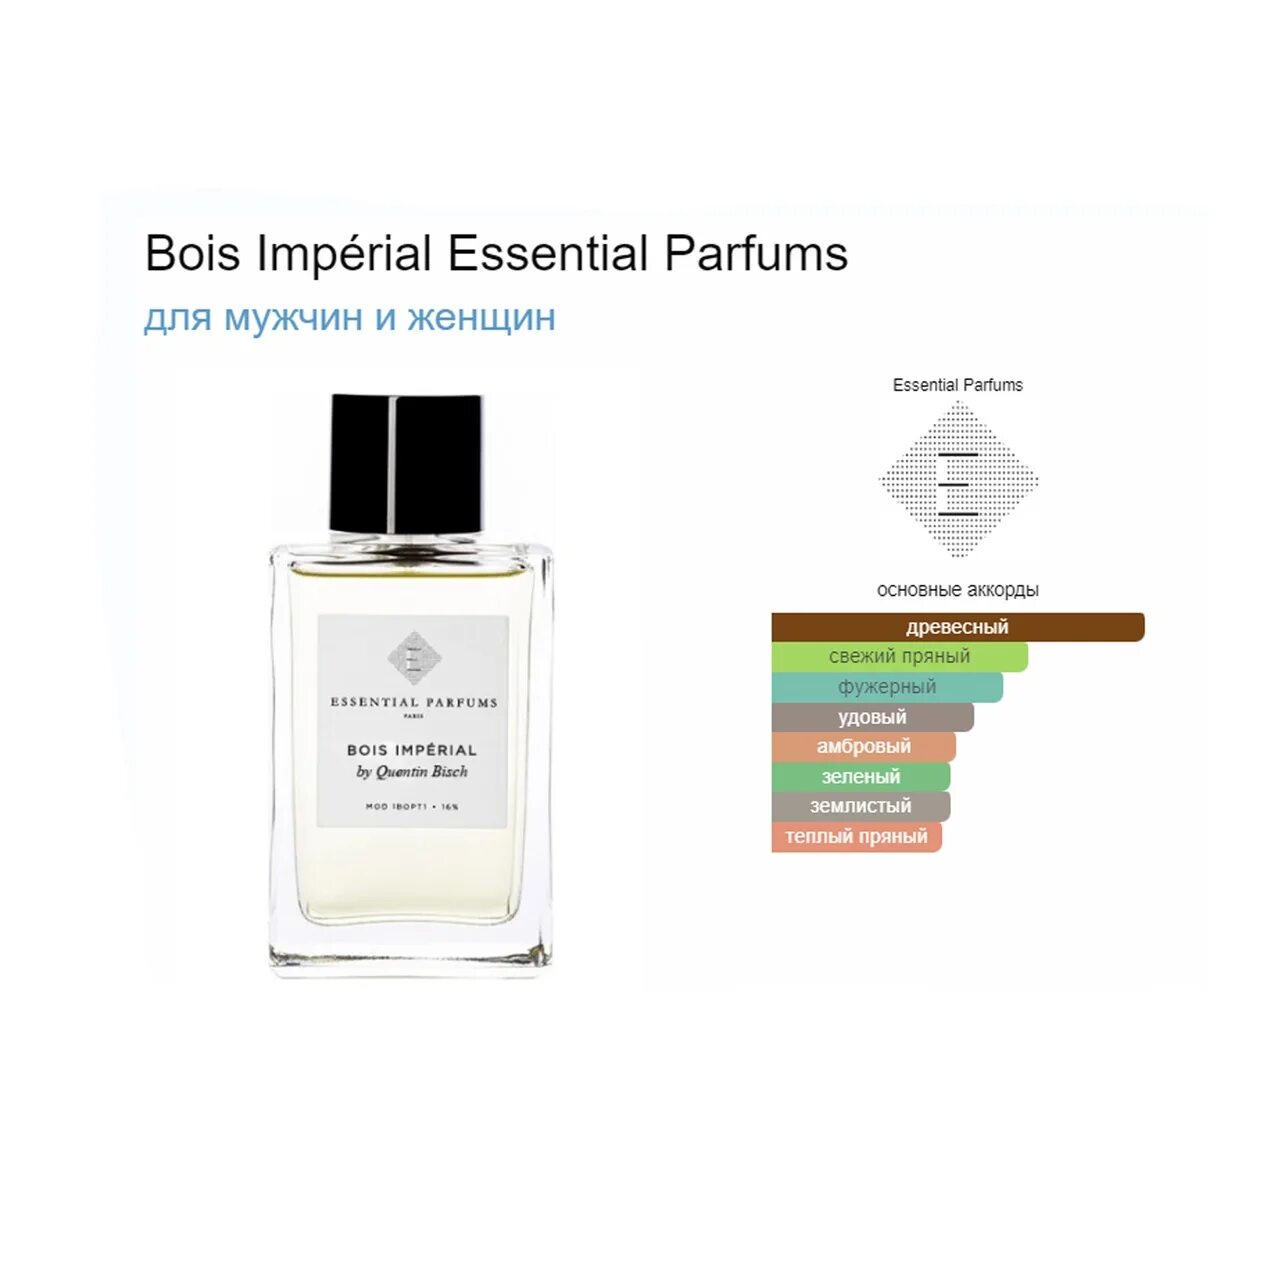 Bois Imperial от Essential Parfums. Essential Parfums bois Imperial 10 ml. Essential Parfums bois Imperial 100 ml. Духи Essential Parfums bois Imperial by Quentin bisch. Эссенциале парфюм бойс